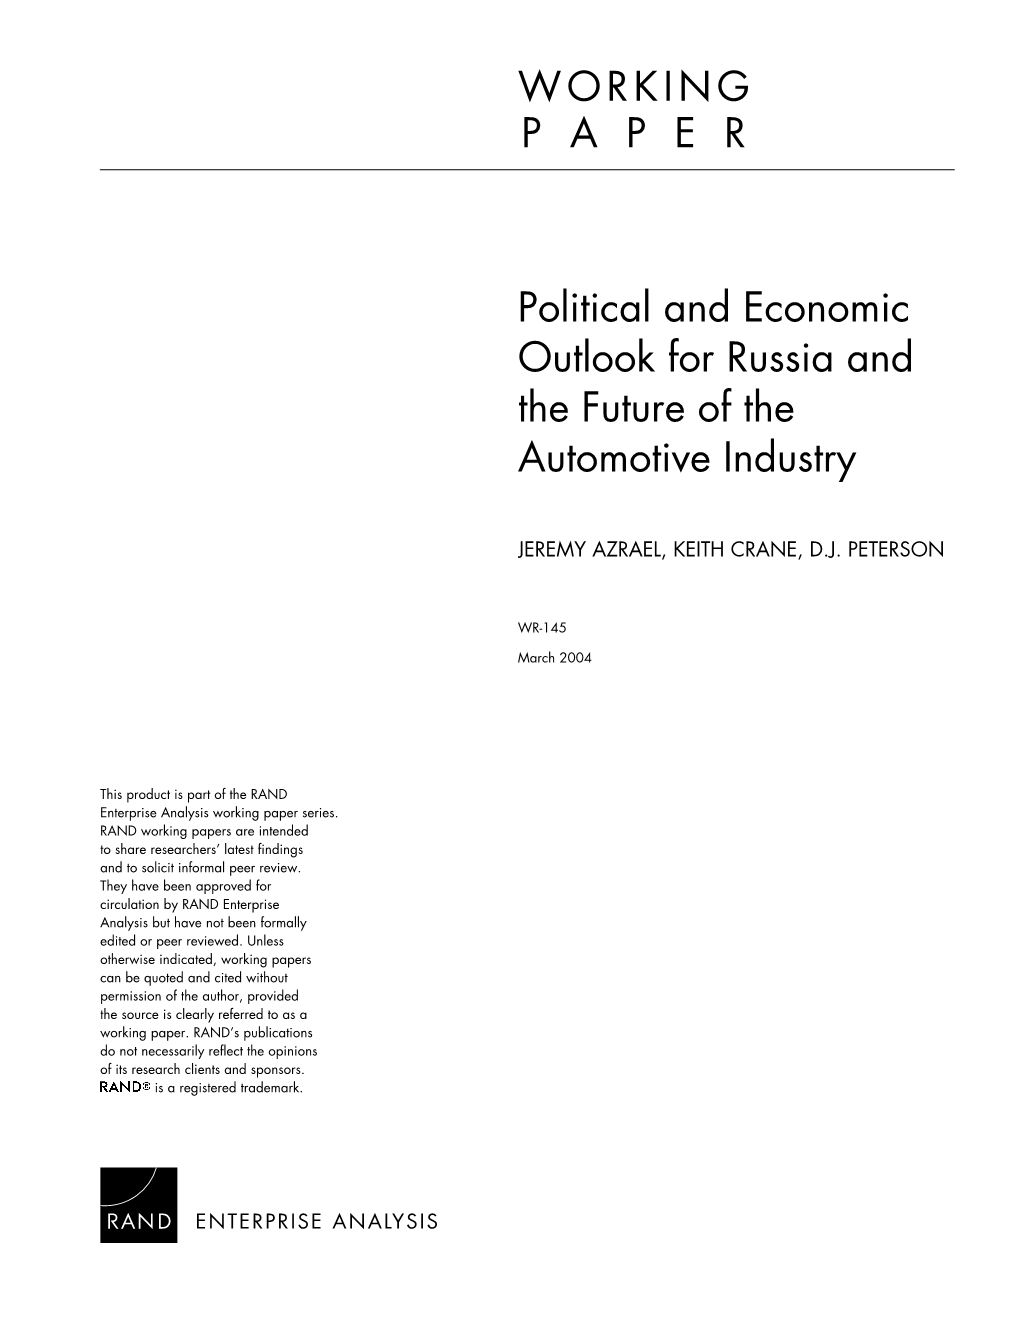 Political and Economic Outlook for Russia and the Future of the Automotive Industry